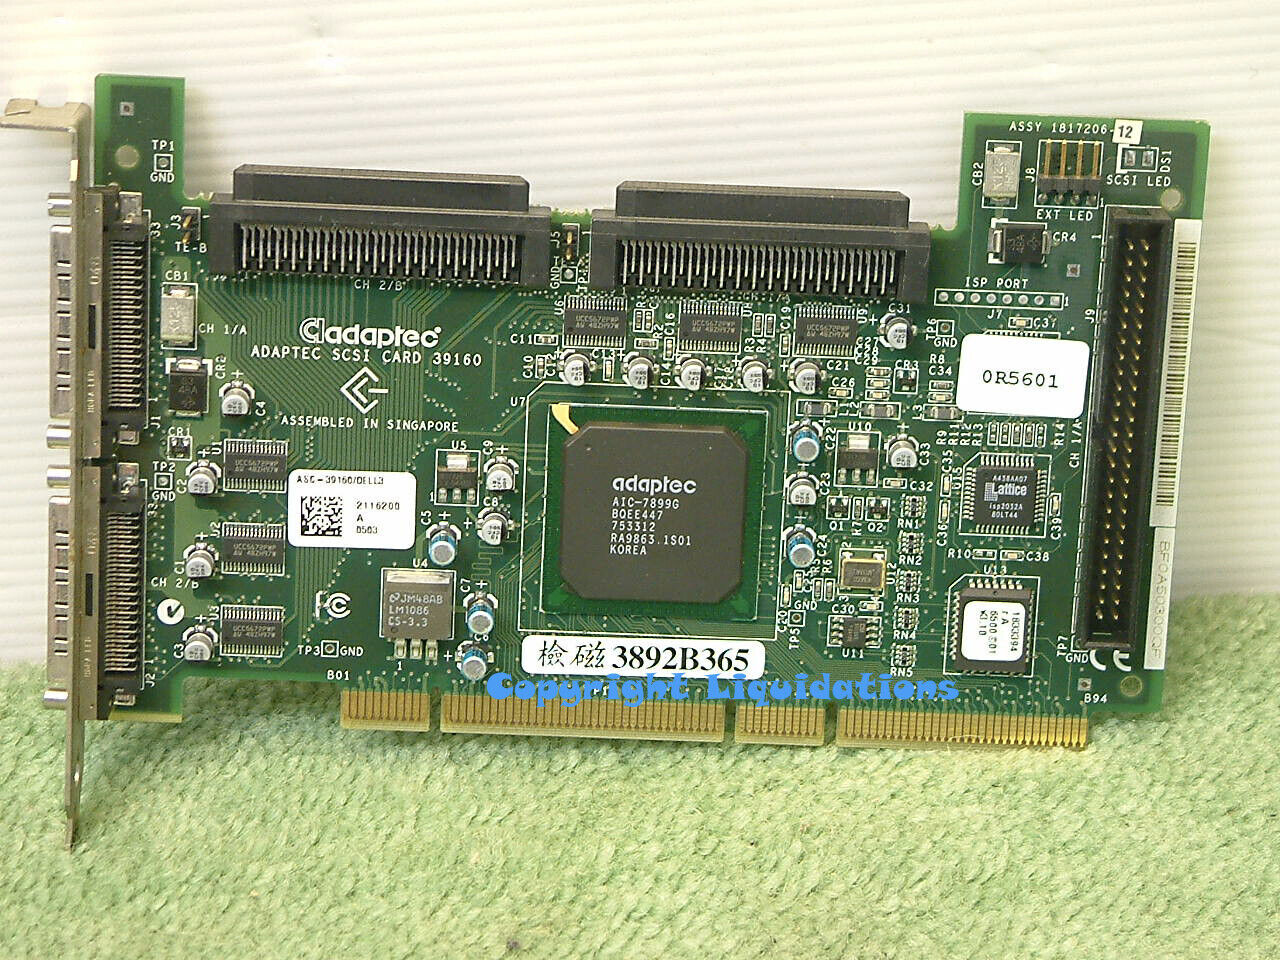 ADAPTEC 39160 Dual Channel SCSI Controller Card Ultra 160 MB/sec PCI-x Interface